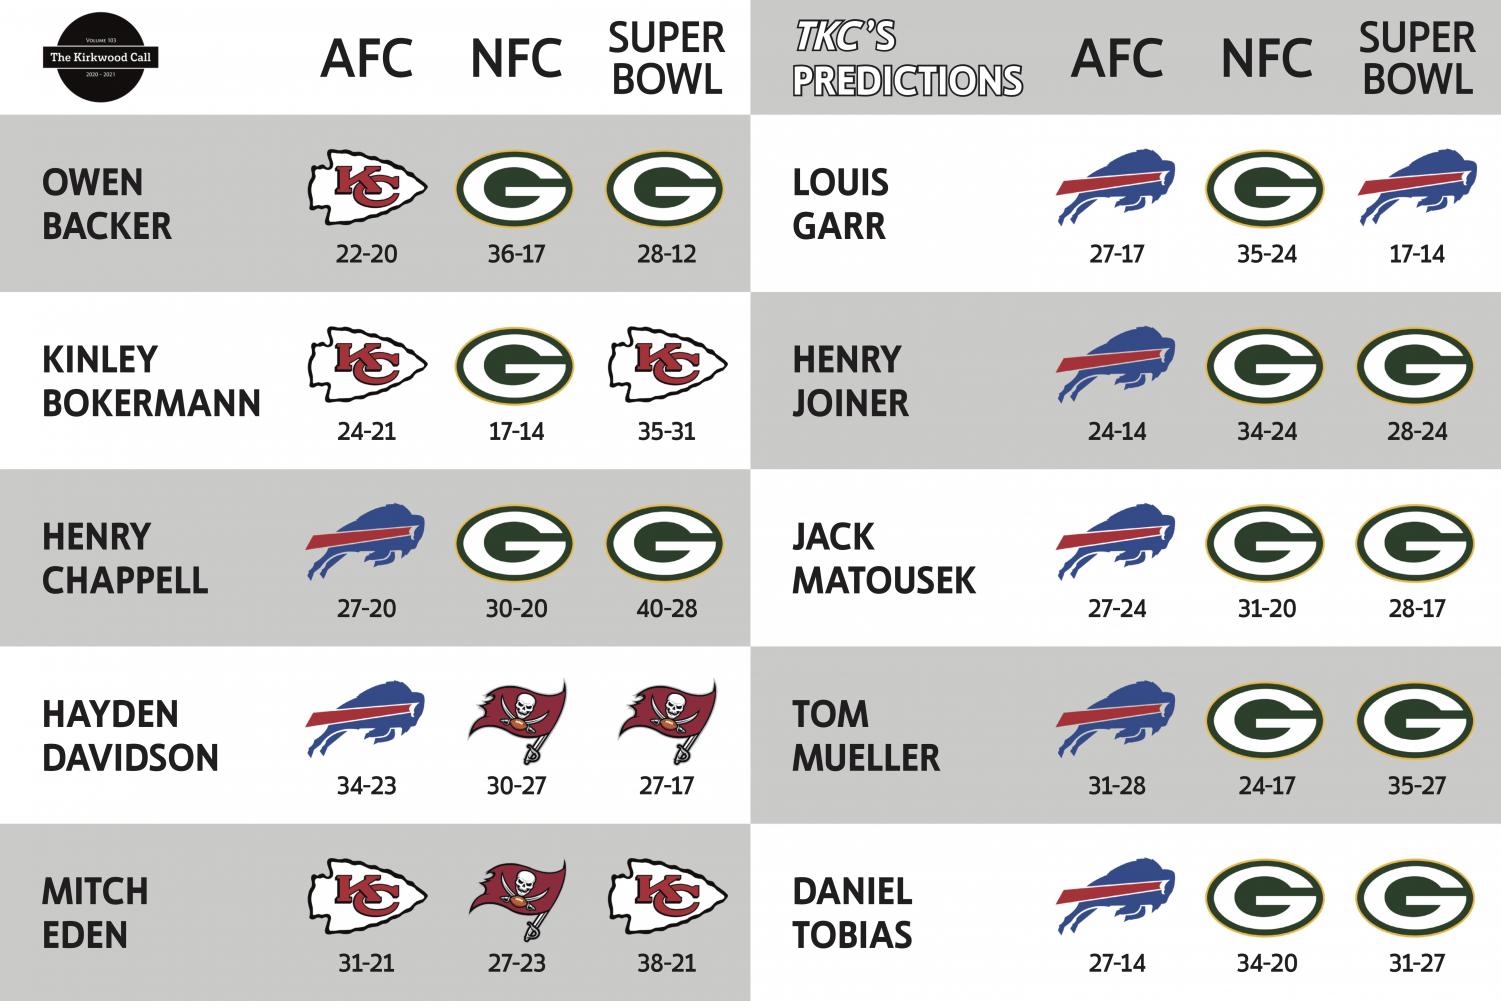 2022 NFL PLAYOFF PREDICTIONS! YOU WON'T BELIEVE THE SUPER BOWL MATCHUP!  100% CORRECT BRACKET! 